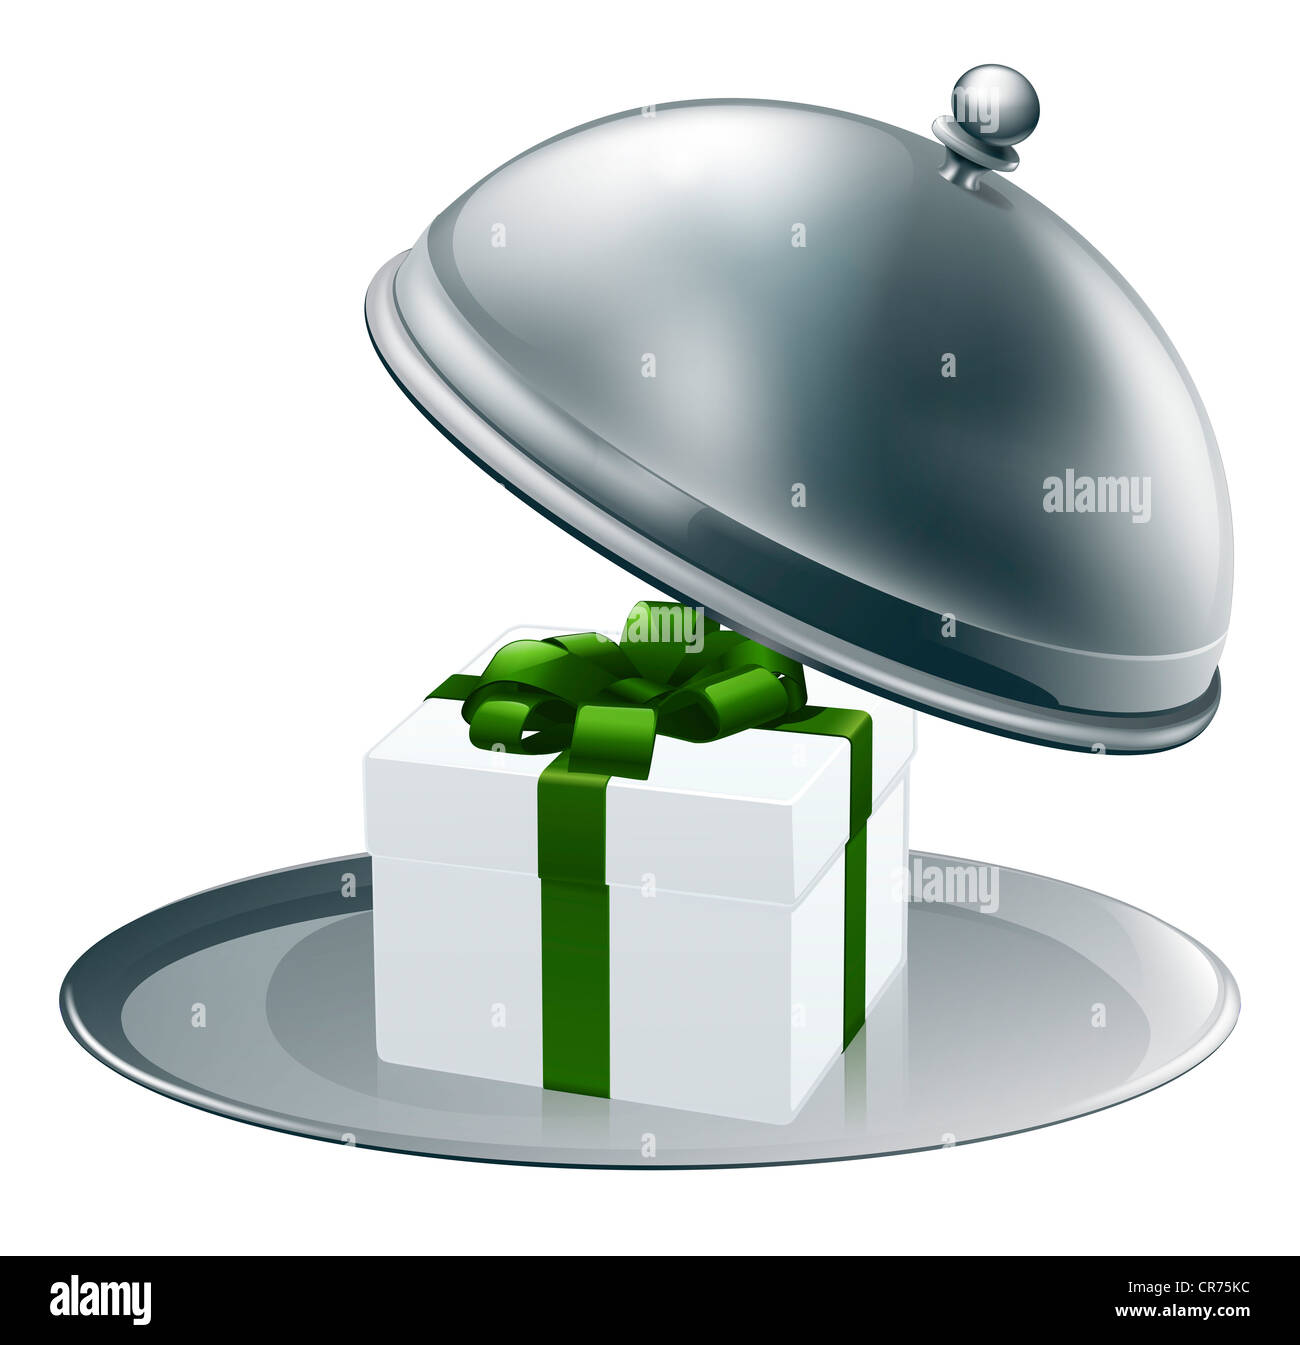 Illustration of a luxury gift on a silver platter tied with green ribbon and bow Stock Photo